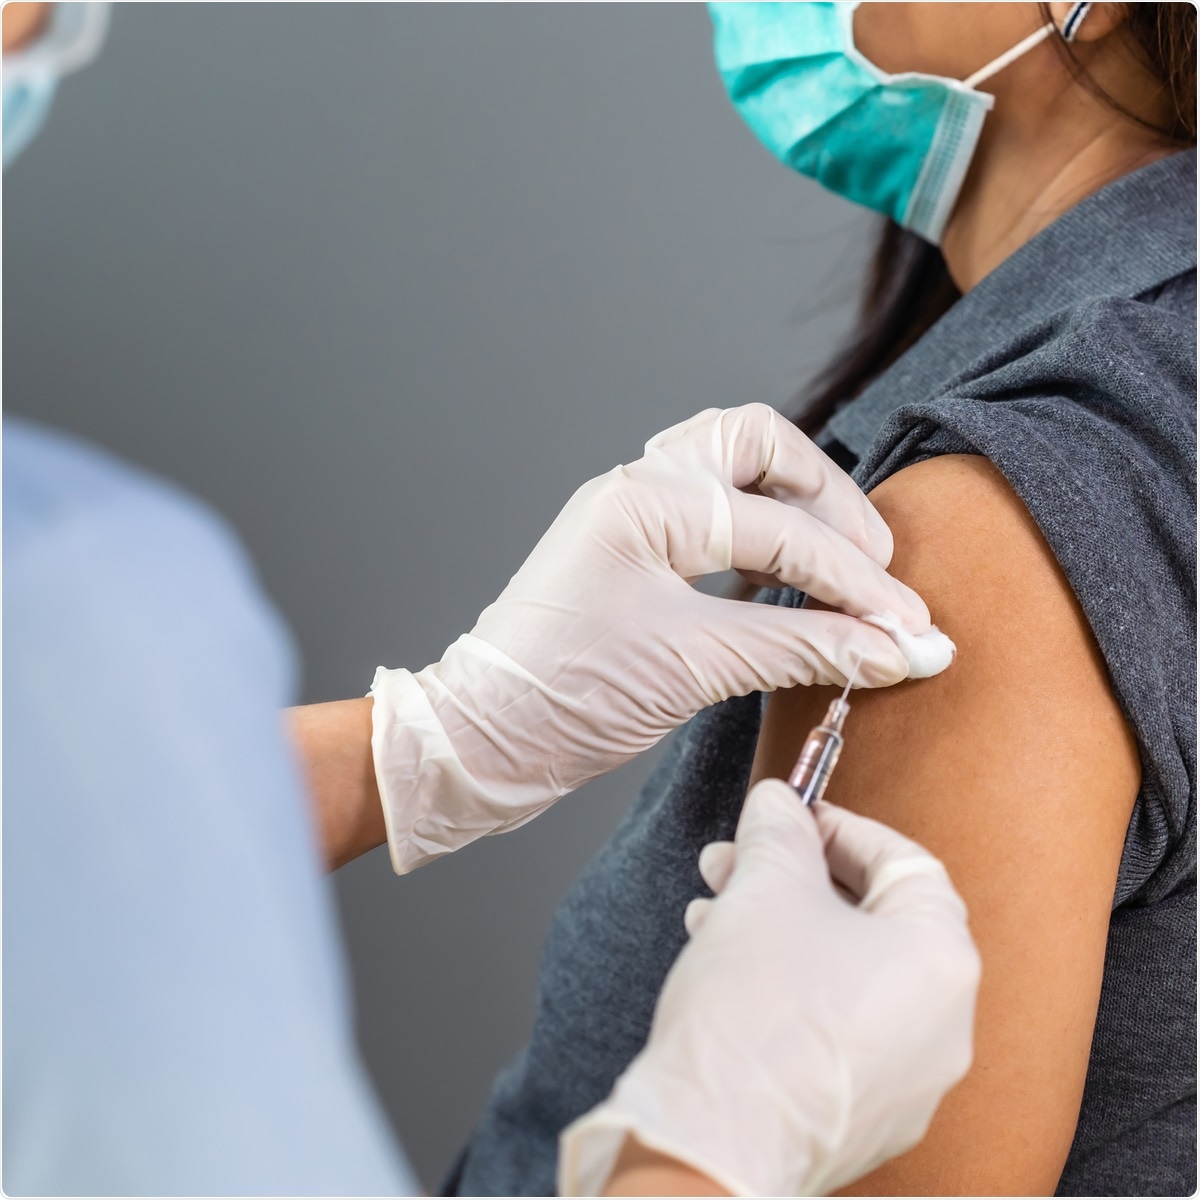 Study: The impact of vaccination on COVID-19 outbreaks in the United States. Image Credit: BaLL LunLa / Shutterstock